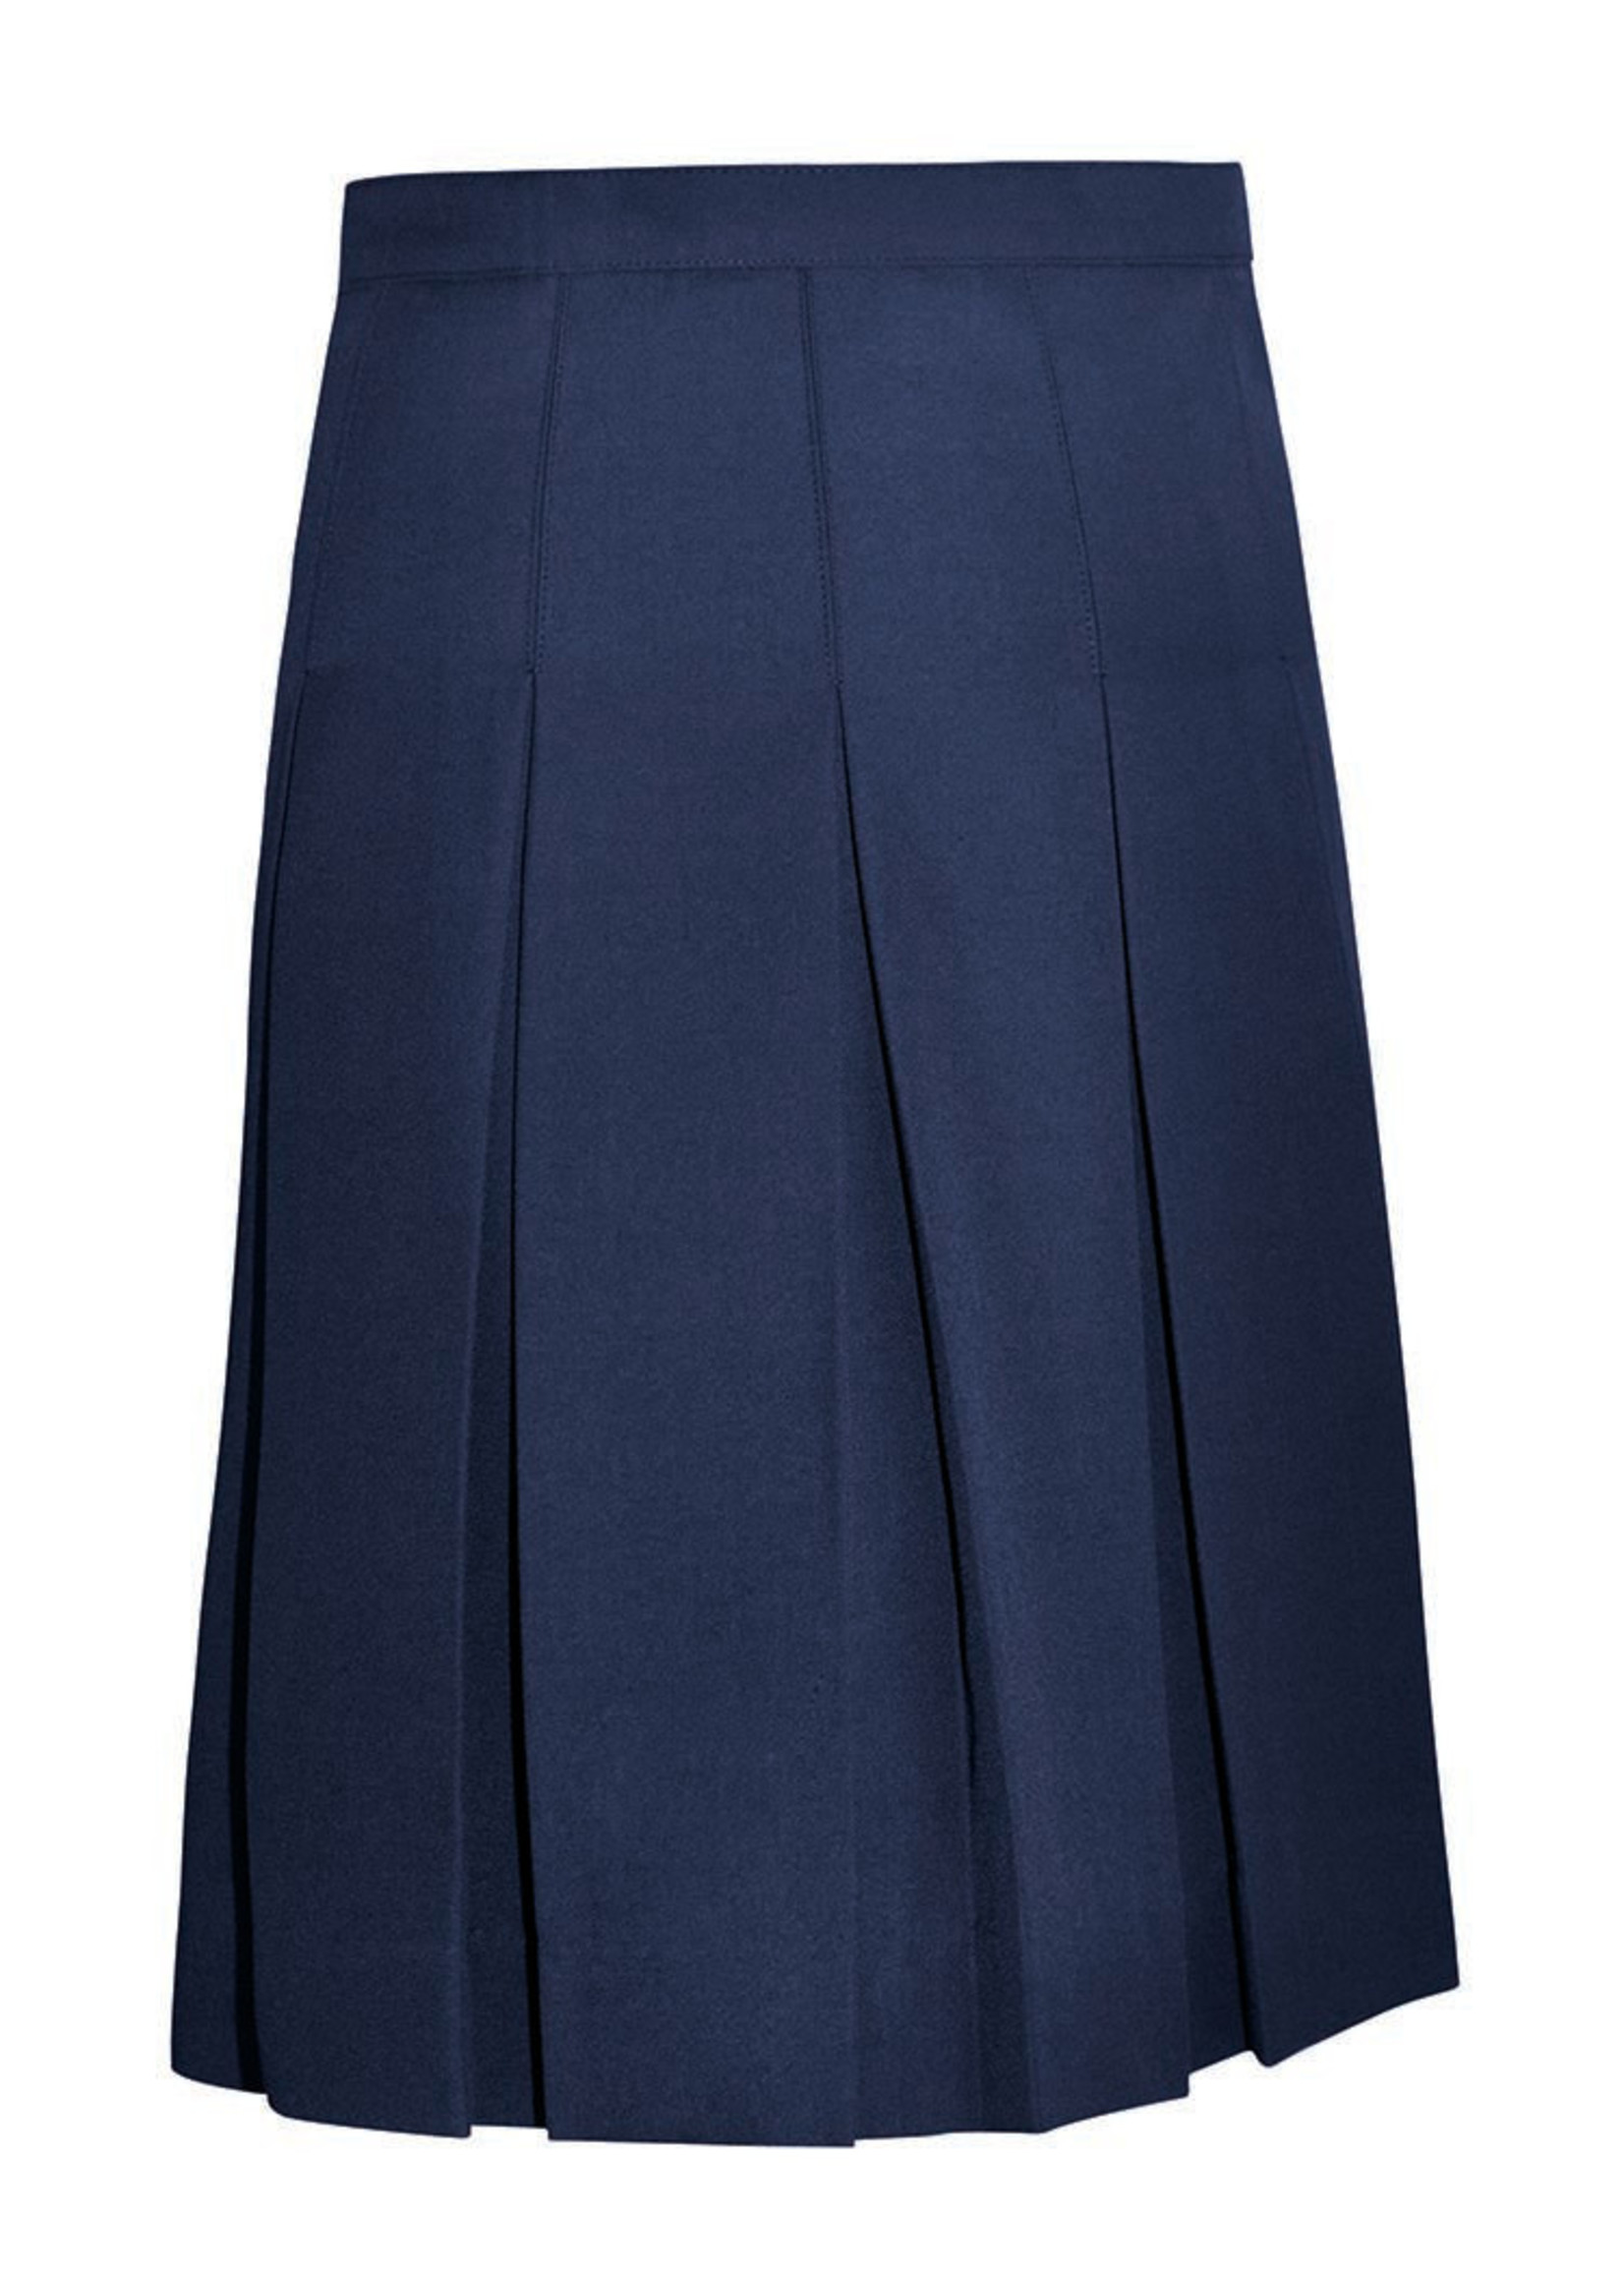 A+ MDCHS 10 Pleat Solid Skirt  KN